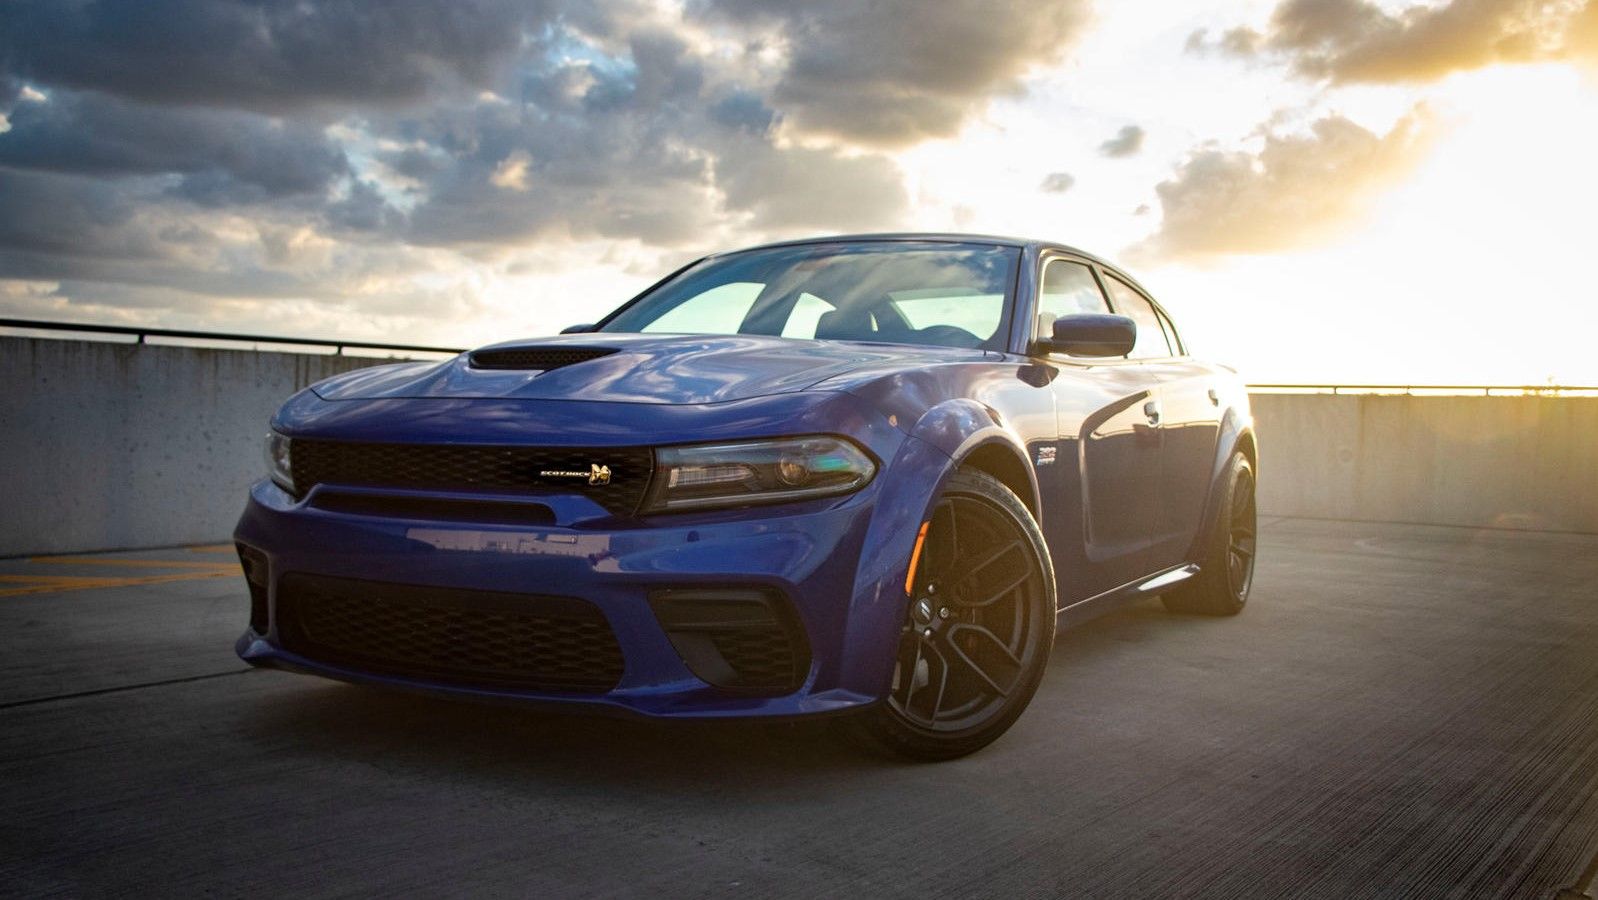 Dodge Charger R T Sedan Review, Performance, MPG, Features, And Rivals